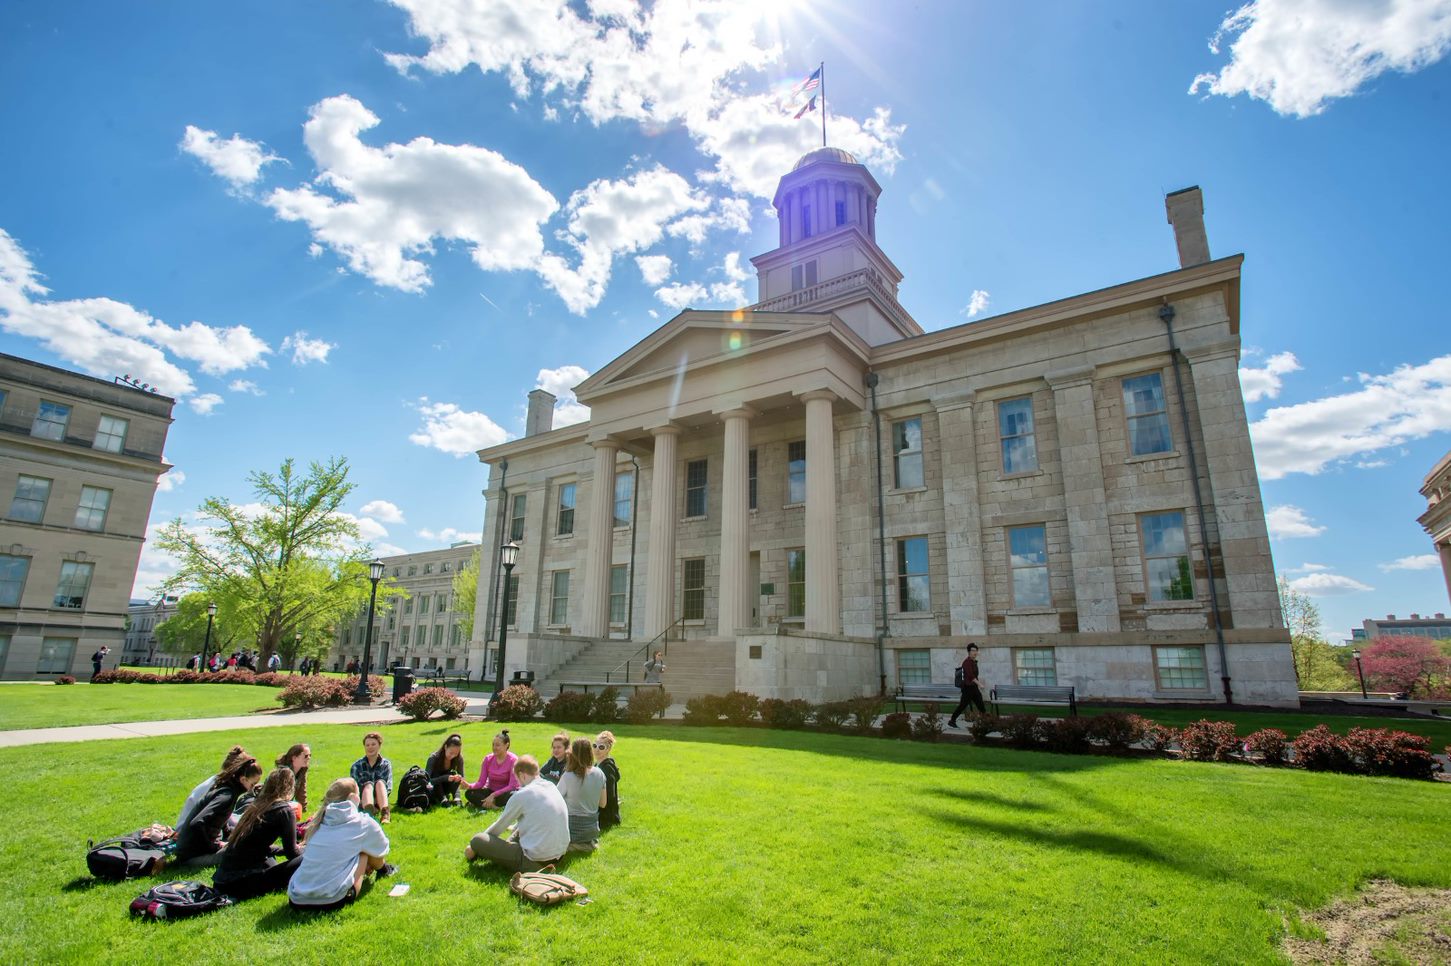 Students sit on the grass in front of the Old Capitol enjoying the nice weather i